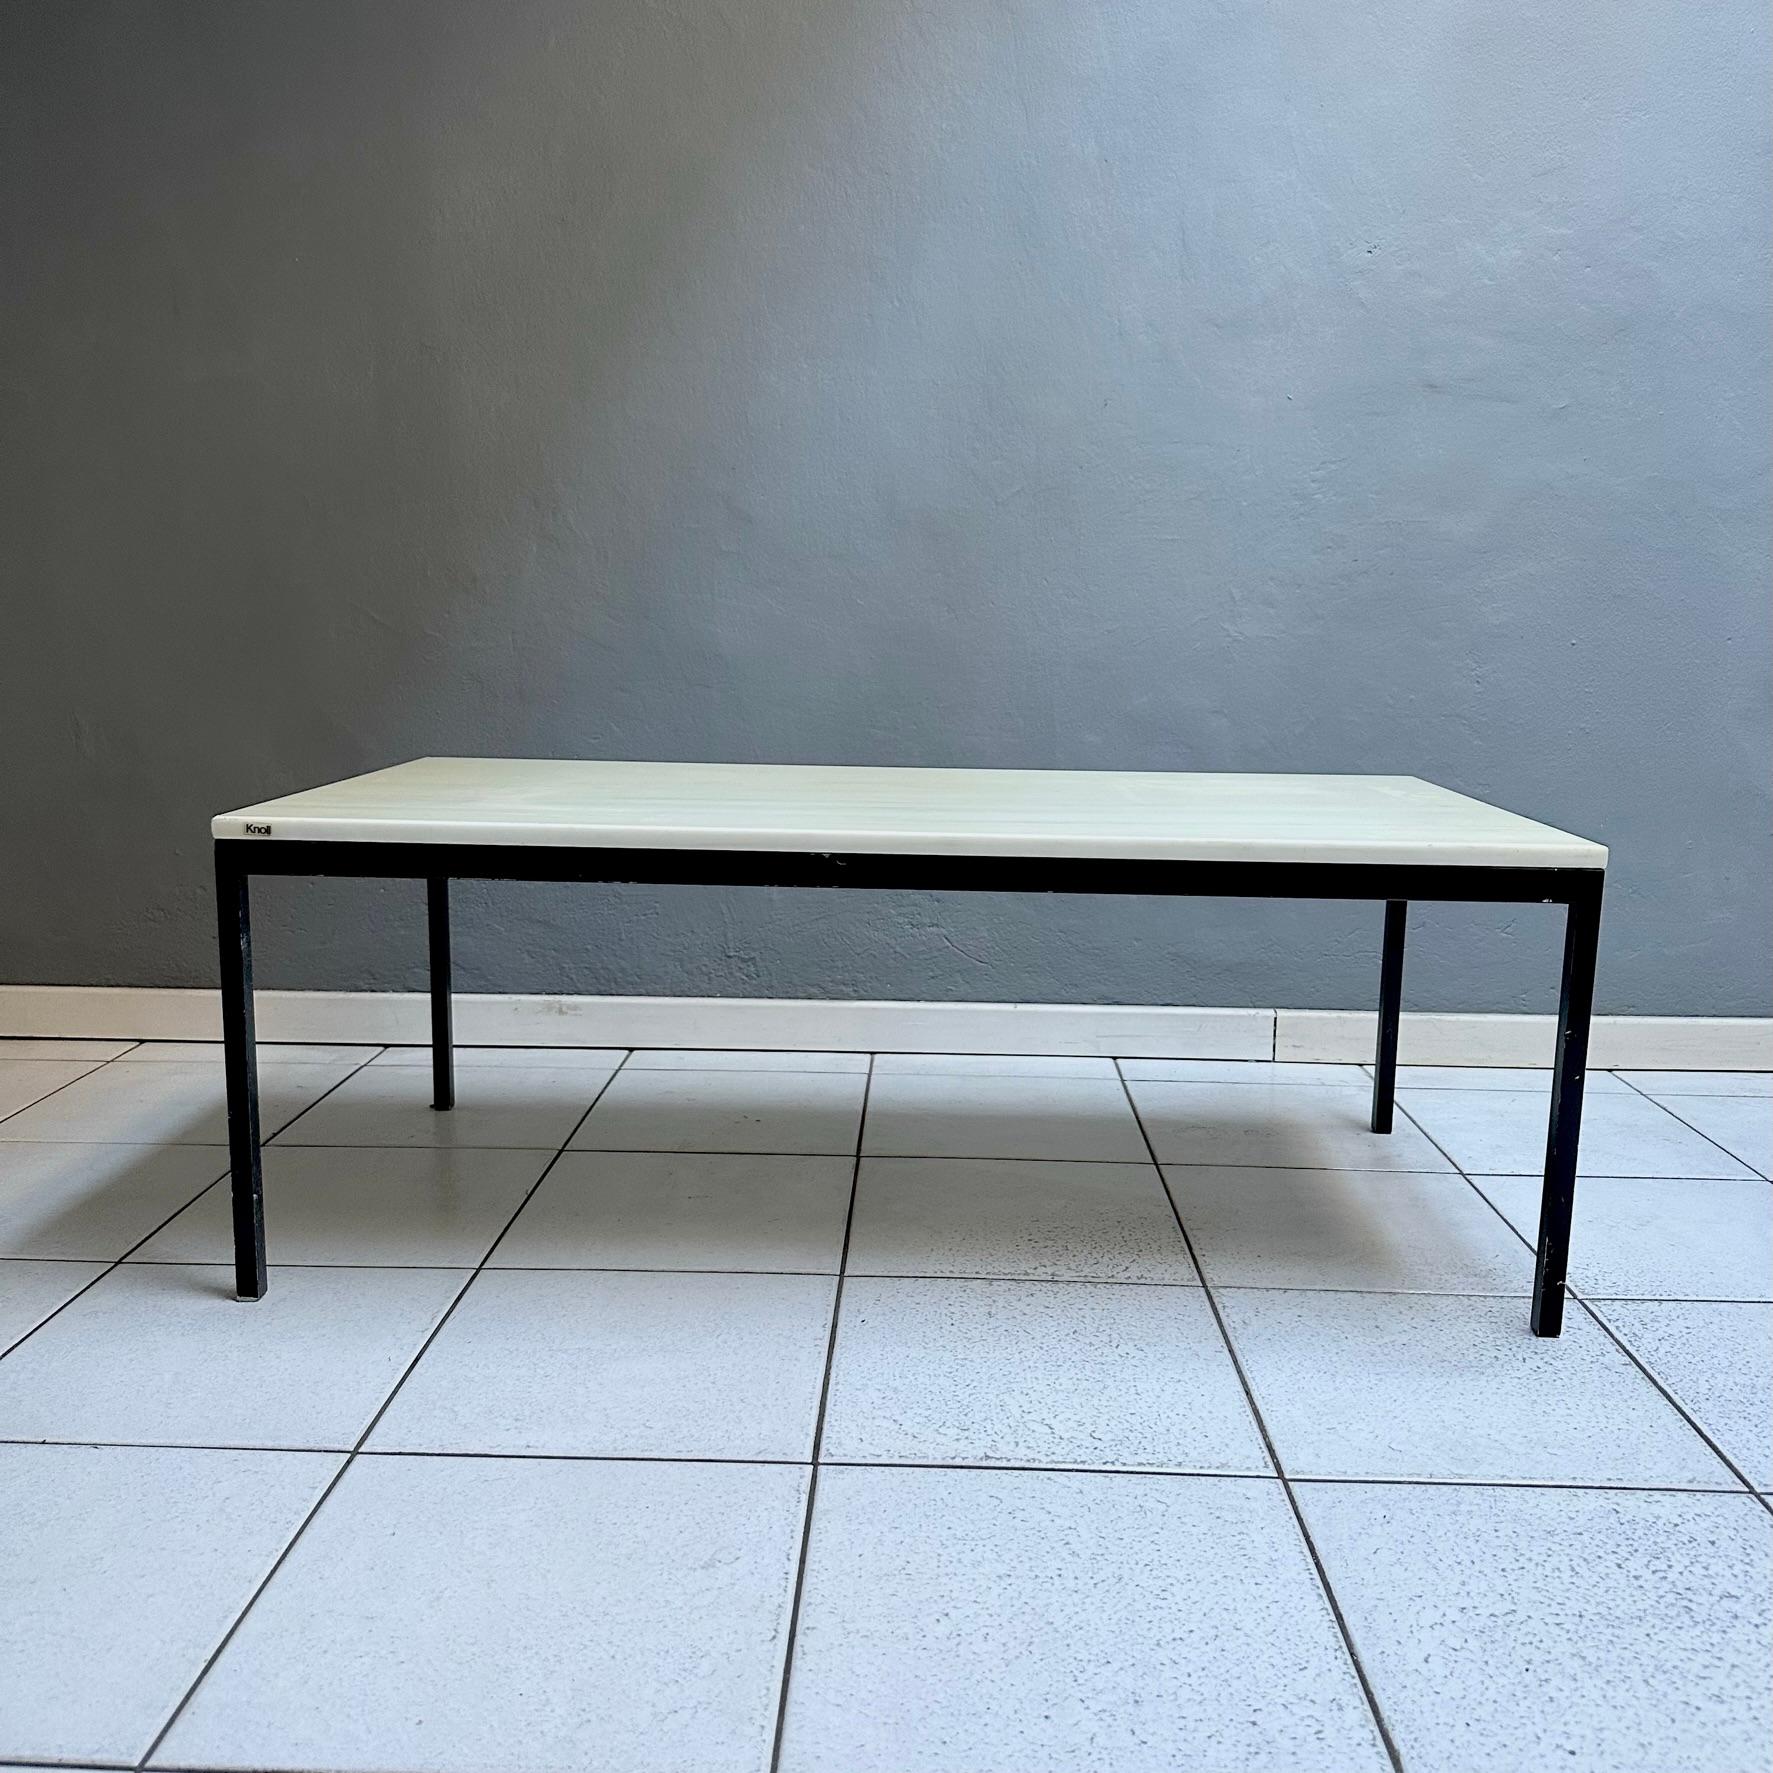 Vintage 70s rectangular coffee table, by Florence Knoll for Knoll International.
Coffee table with black painted steel structure and marble top.
Dimensions
Height:43cm Width: 114cm Depth: 57cm
Light wear due to use and age, visible in the photos